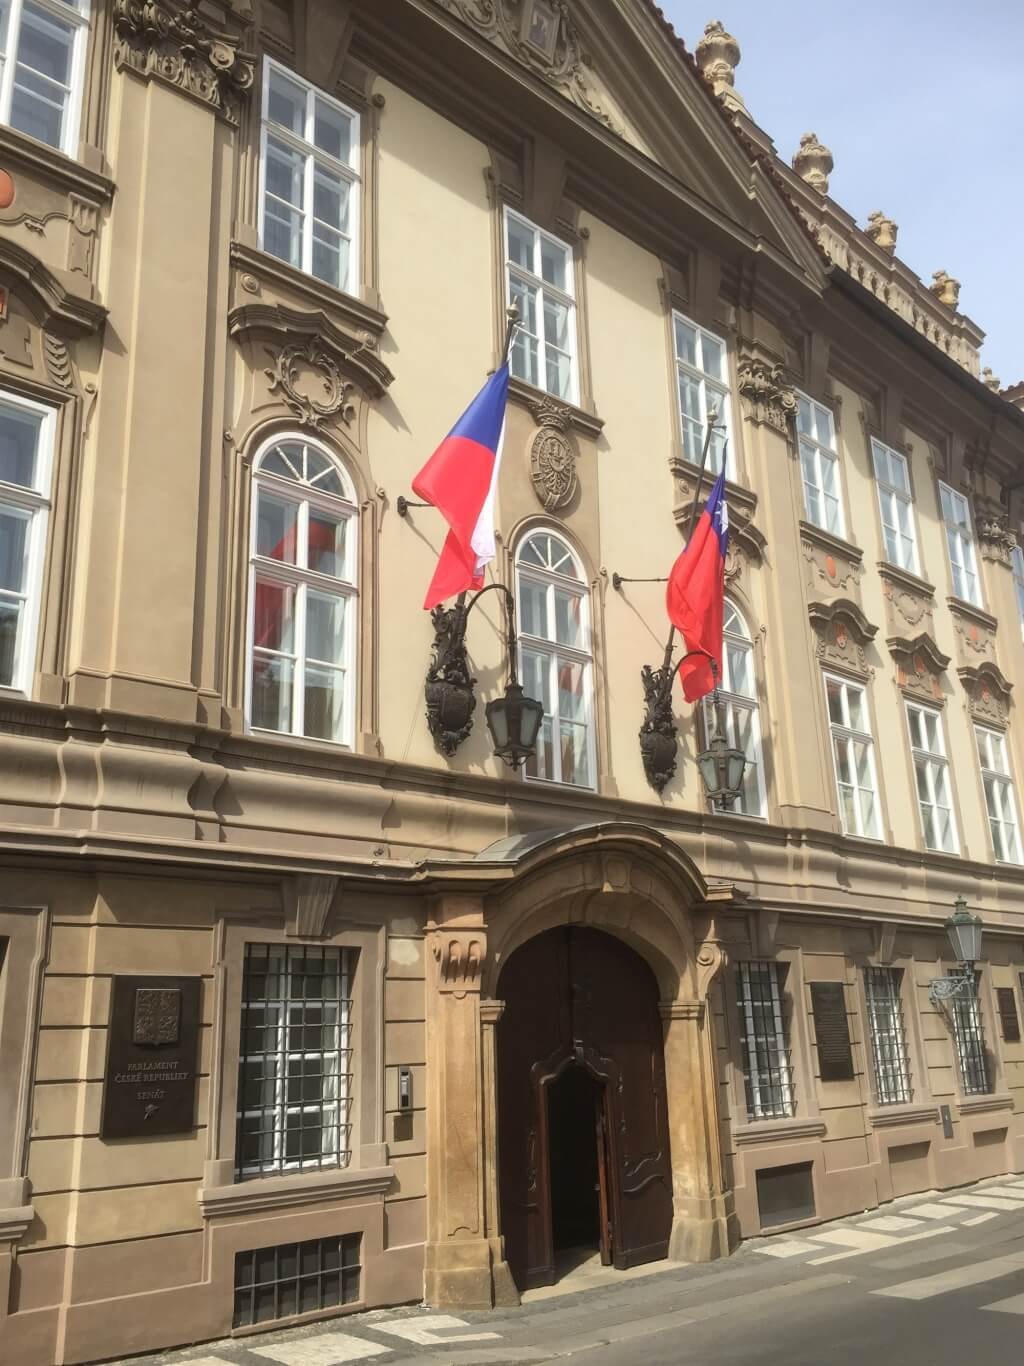 Taiwan delegation led by You Si-kun receives warm welcome in Czechia